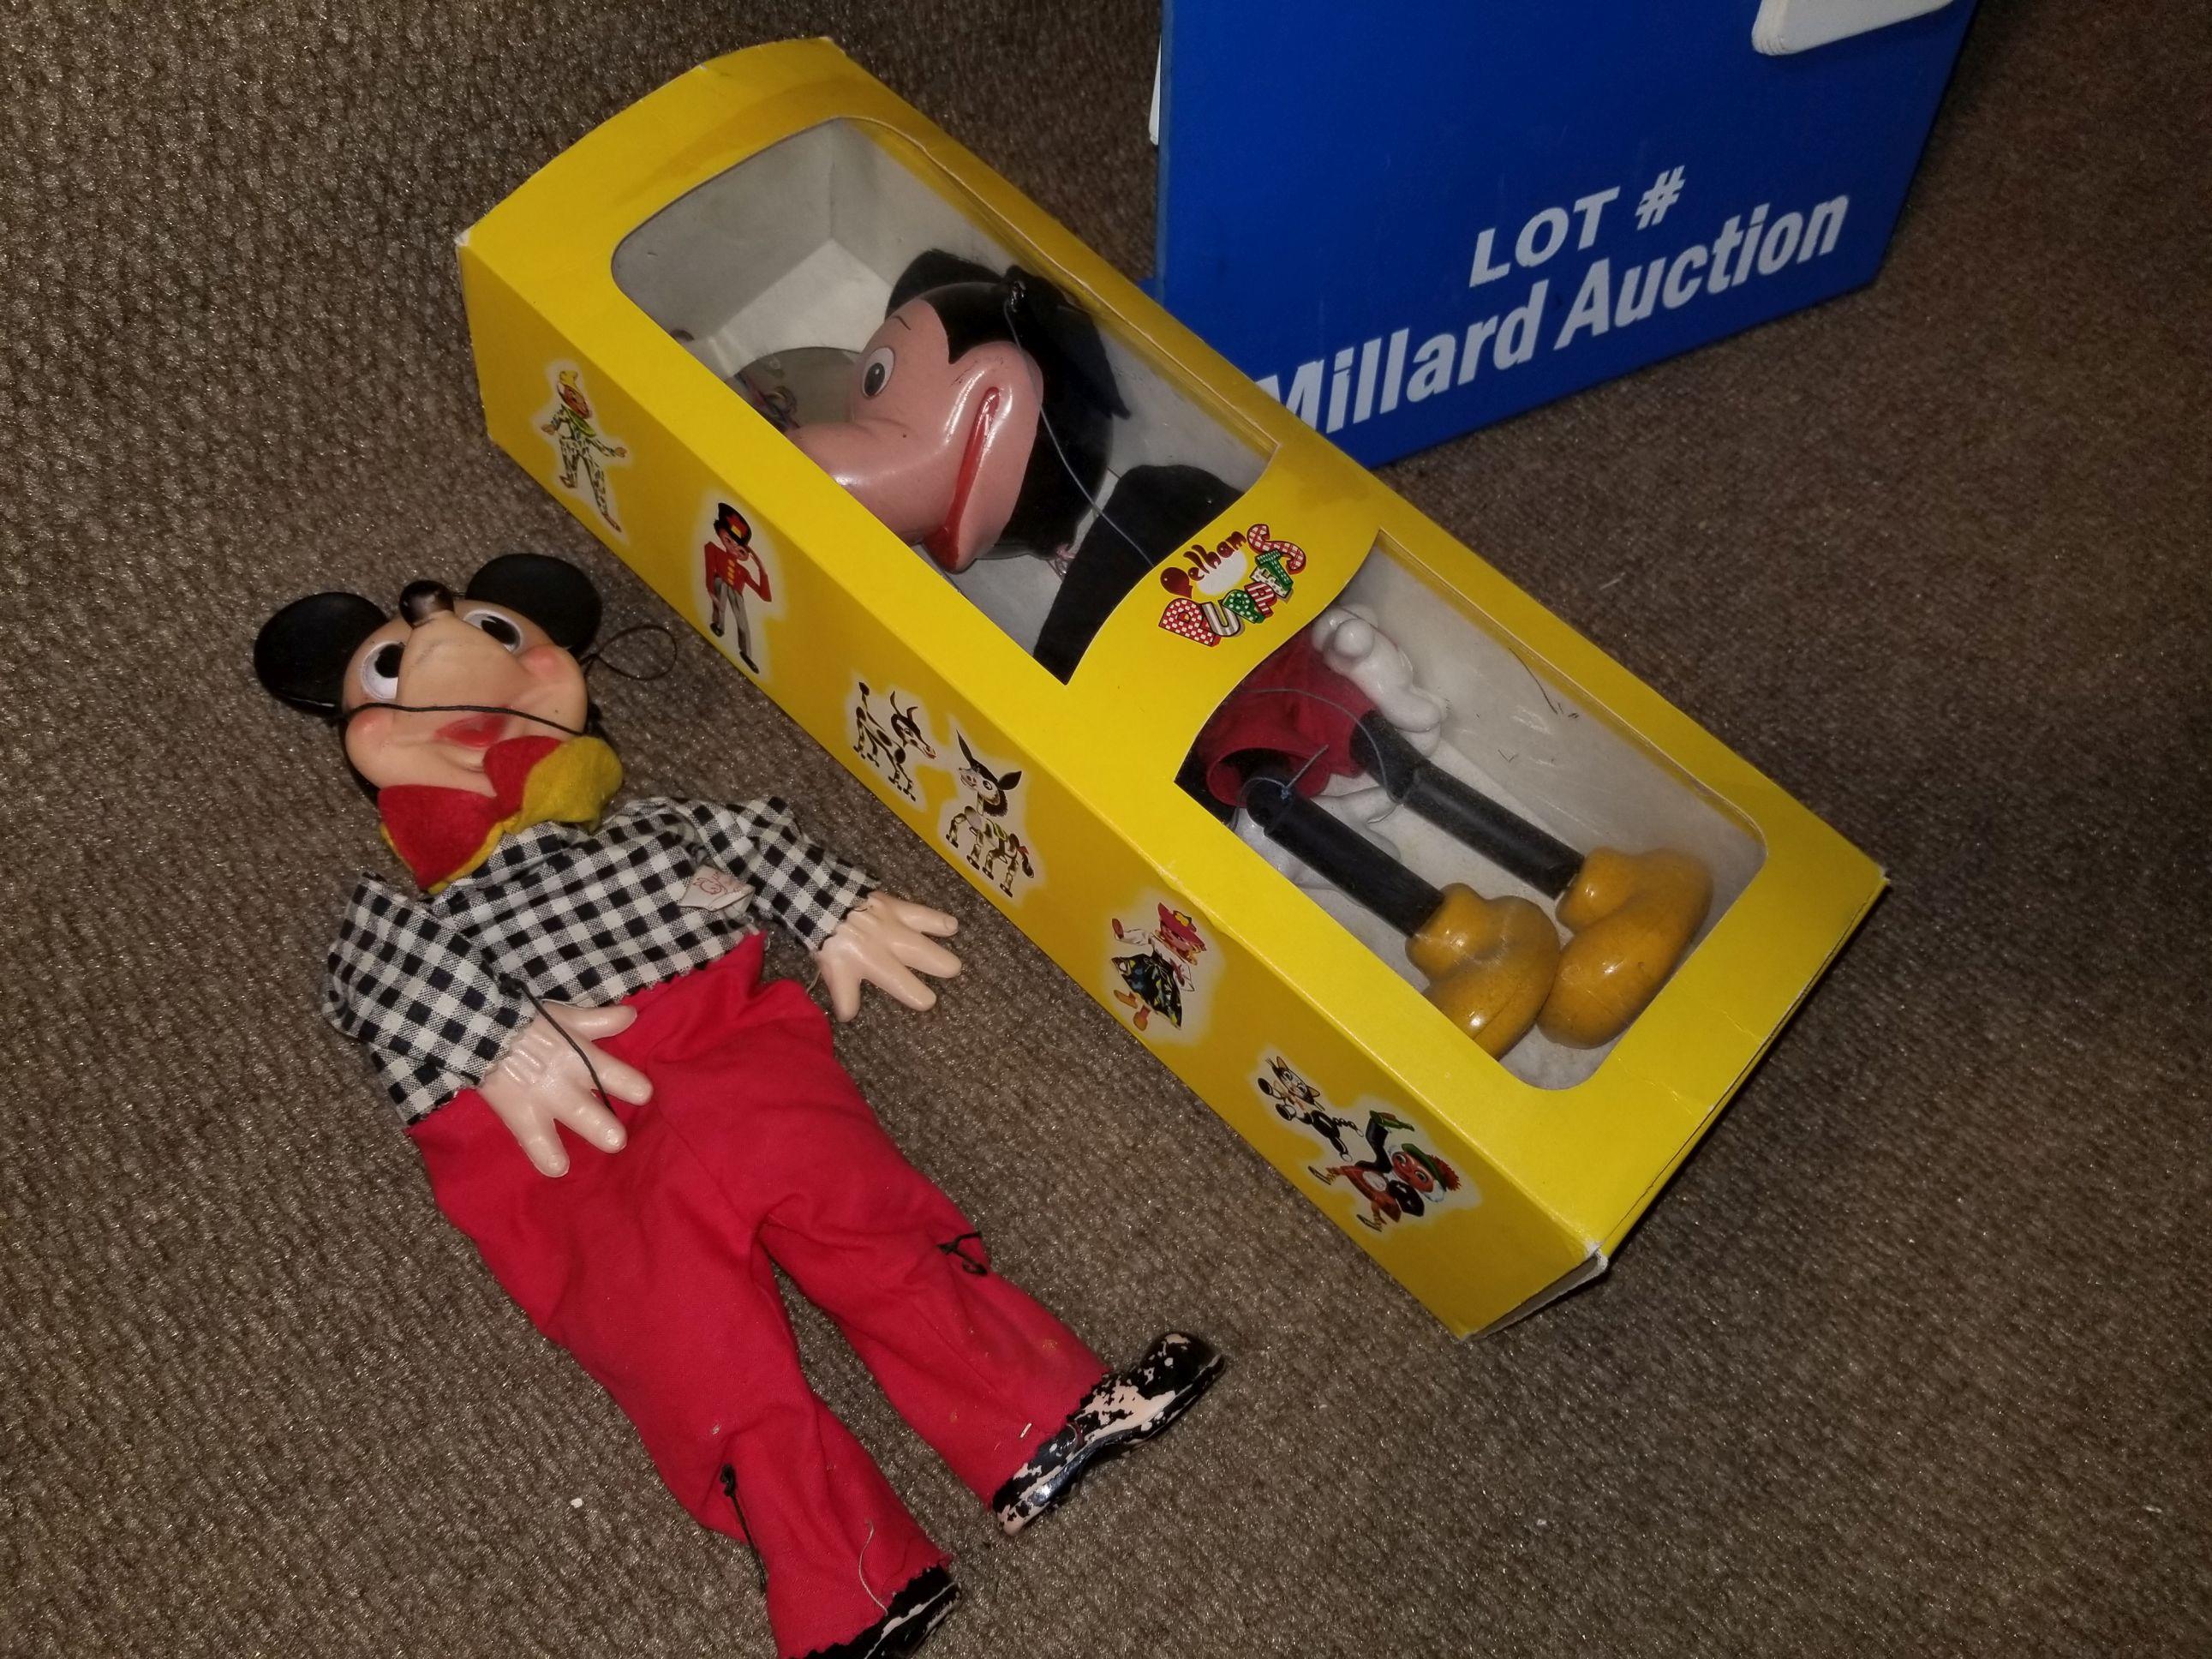 Two Mickey Mouse Marionette Puppets. The Pelhpam in the box & a Gund